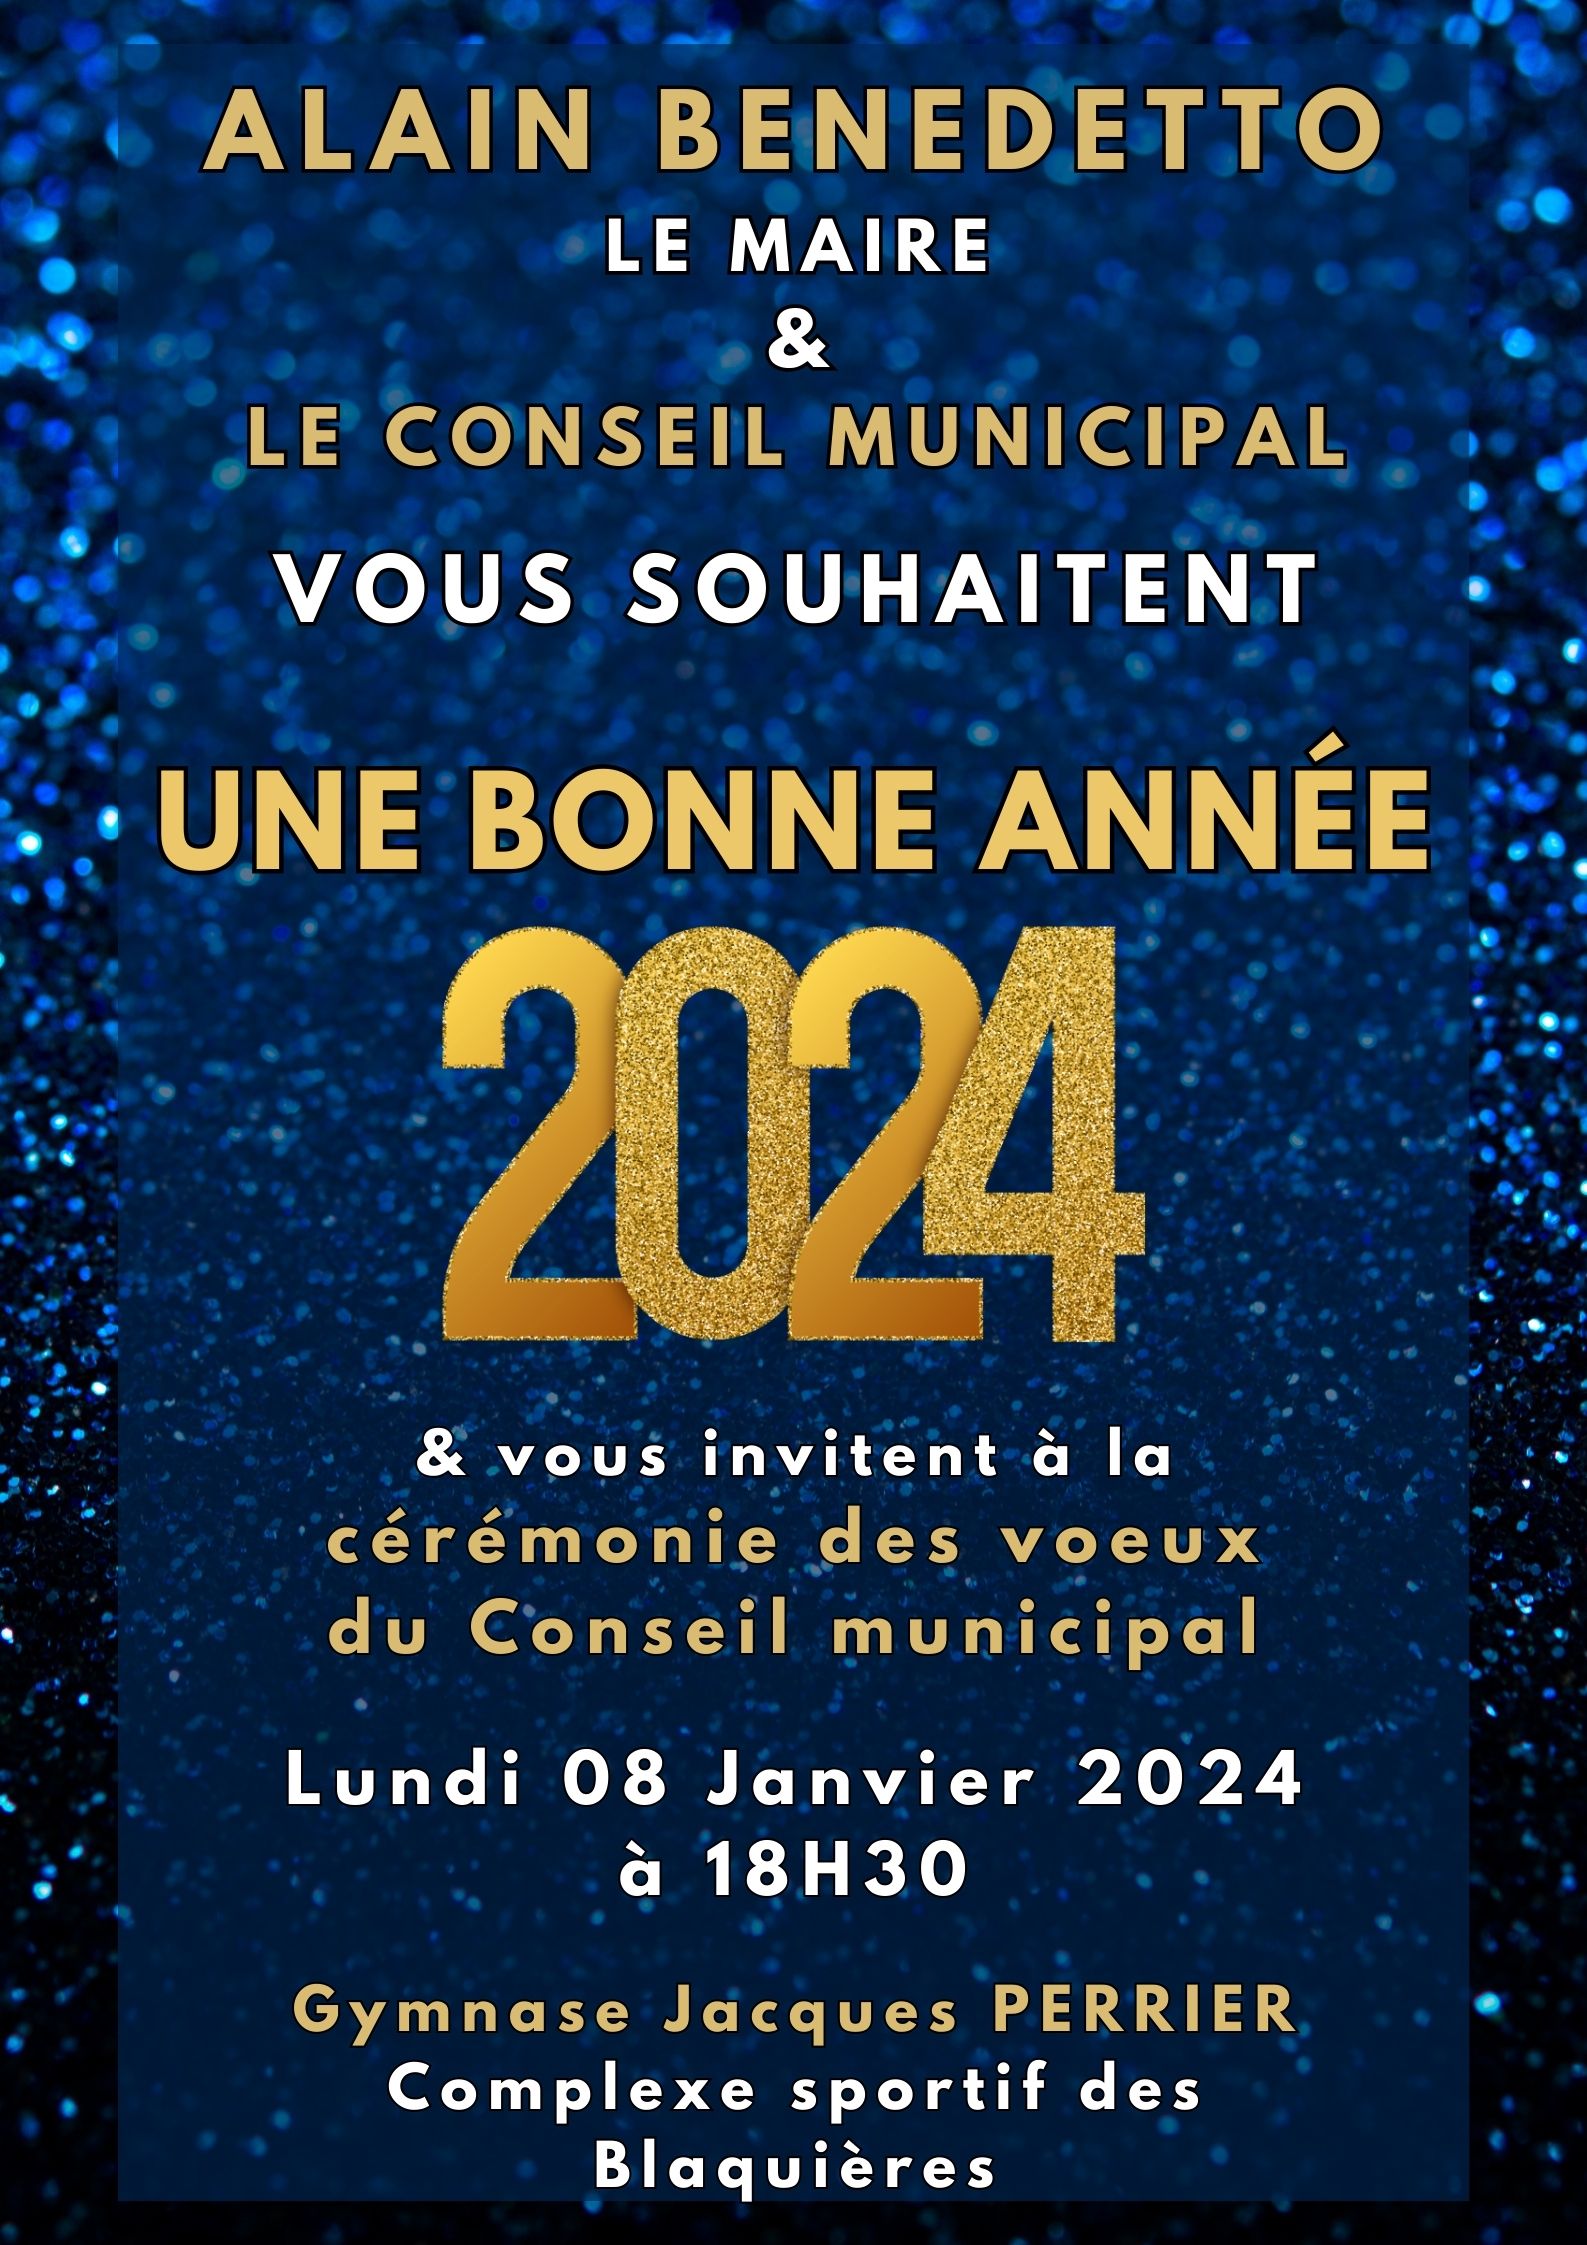 Monday January 8, 2024 - Greetings from the Mayor and the Municipal Council